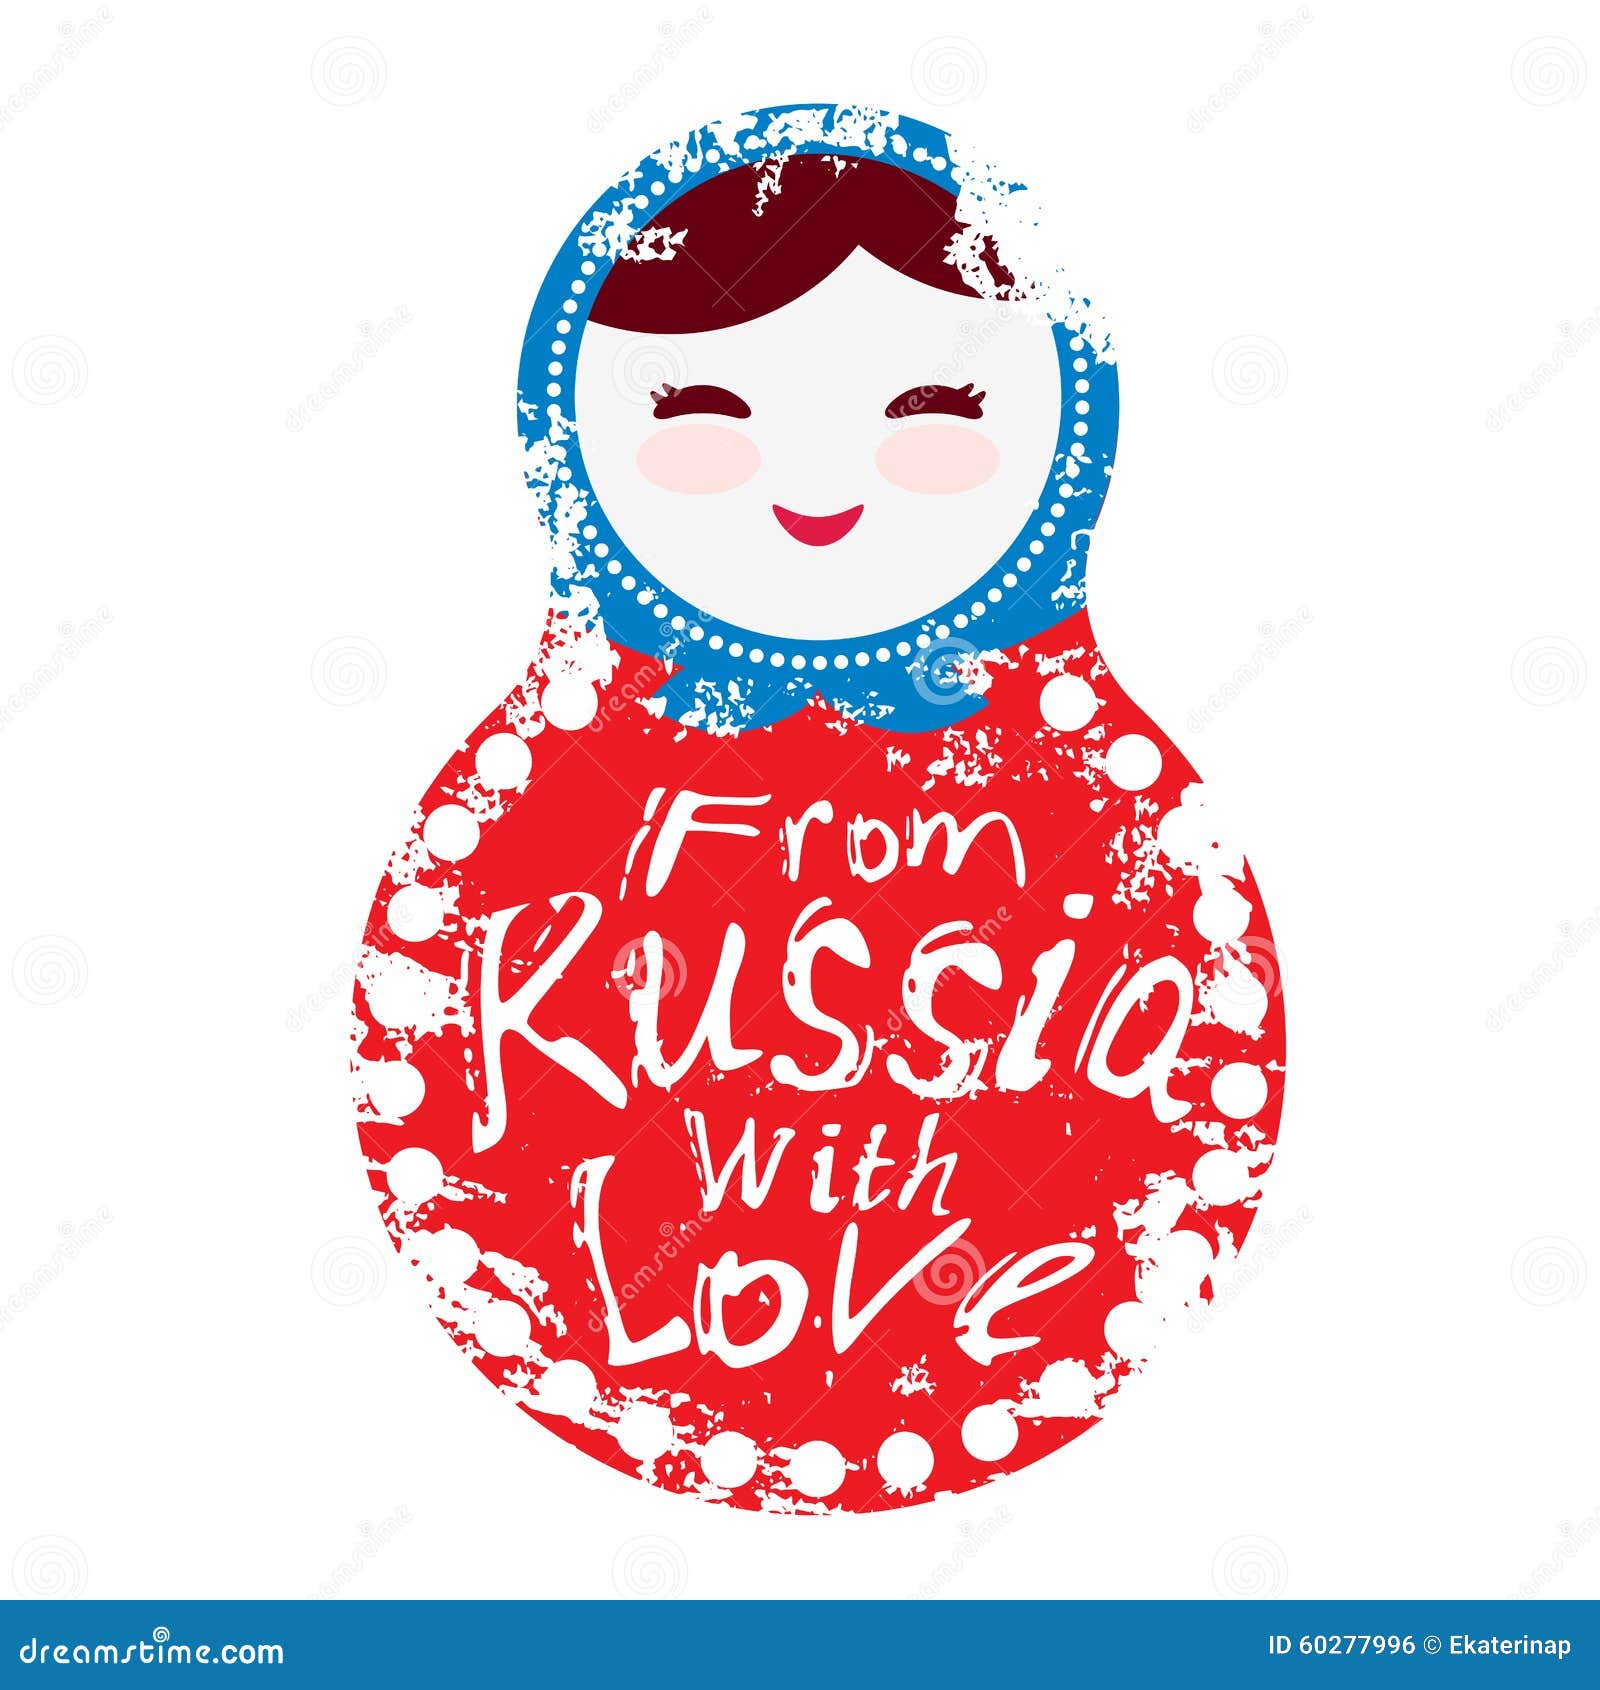 That Love And The Russian 18